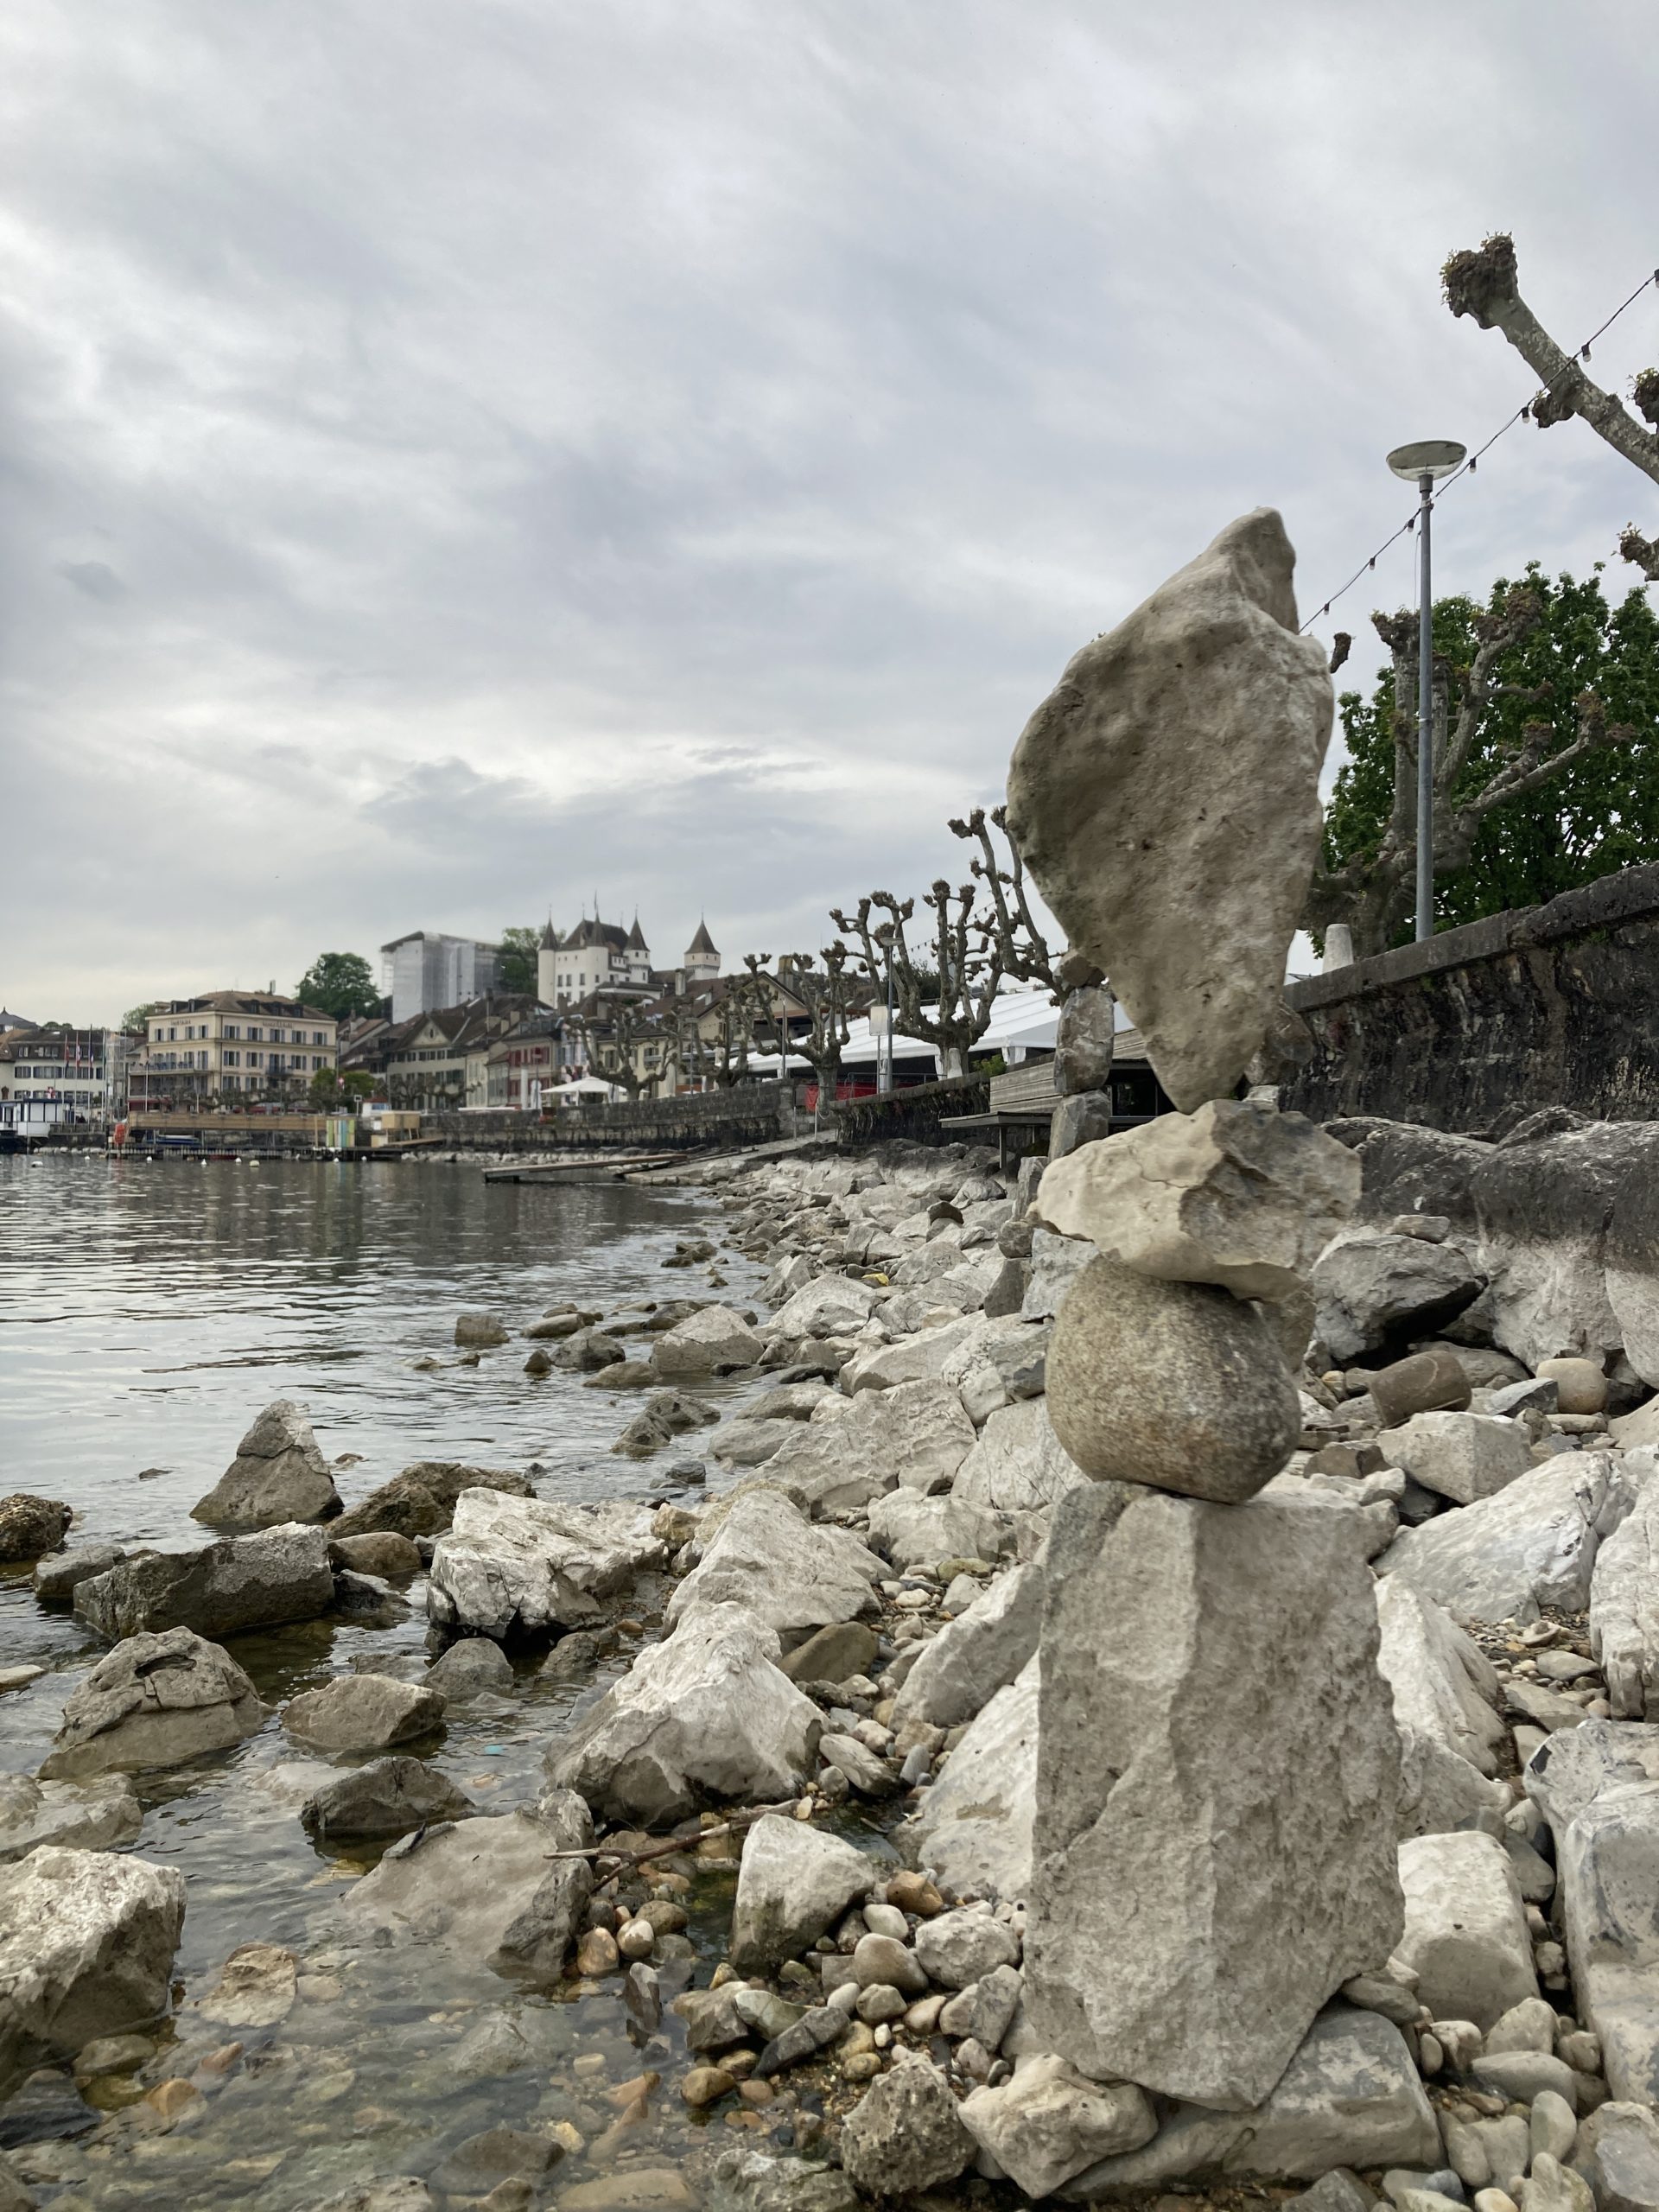 Balanced stones at the lake side with a view of the castle of Nyon